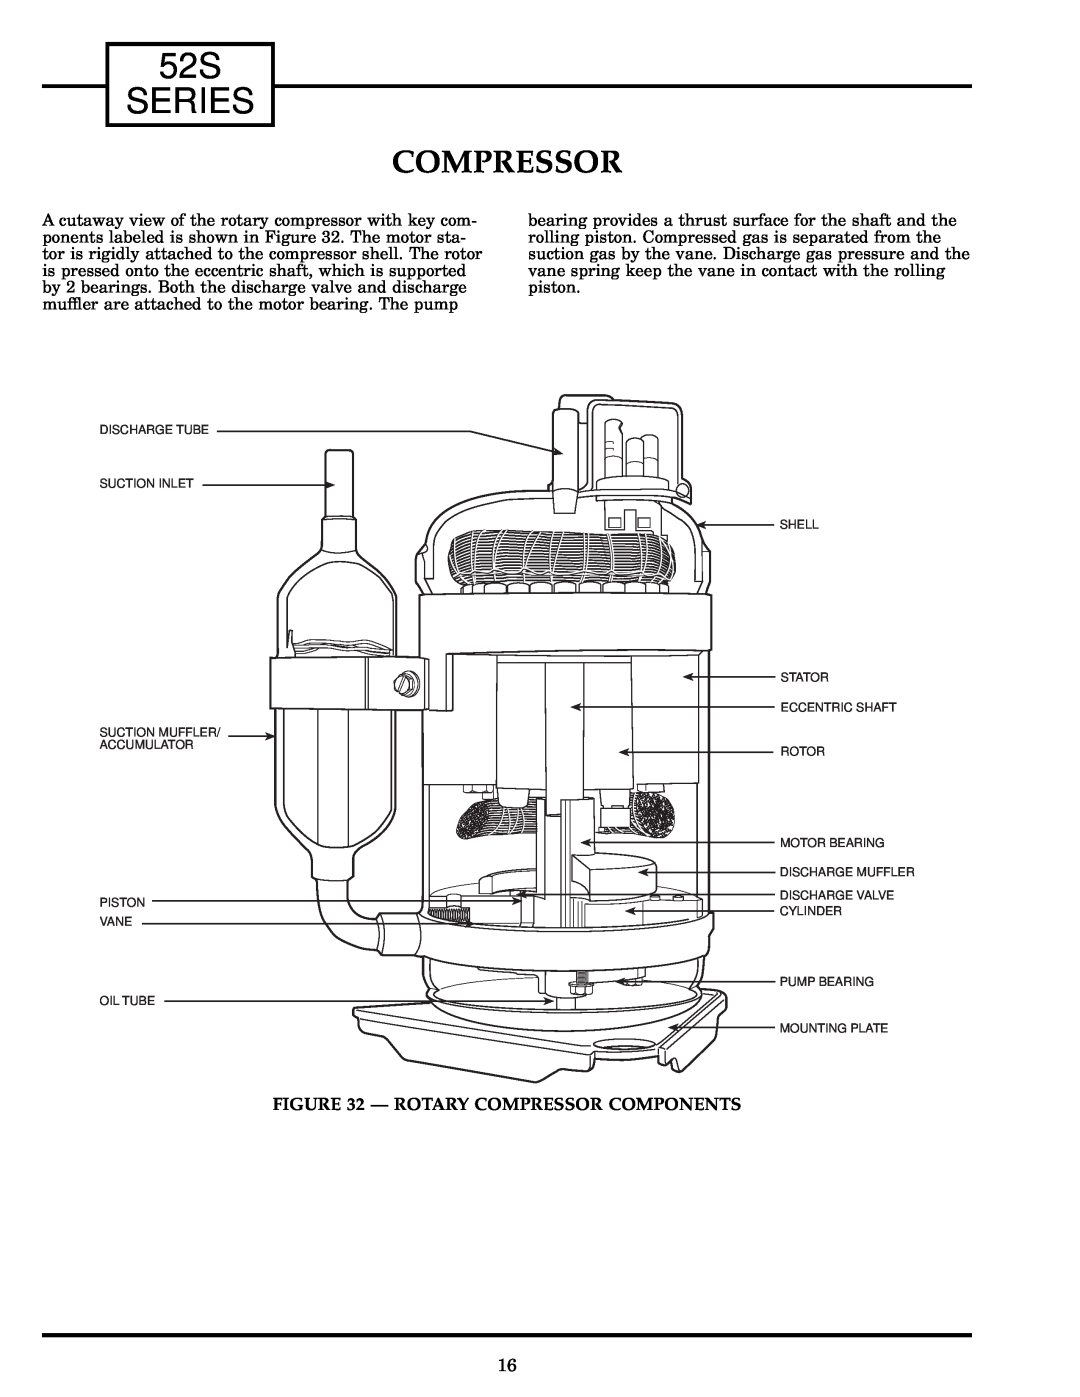 Carrier manual Ð Rotary Compressor Components, 52S SERIES 